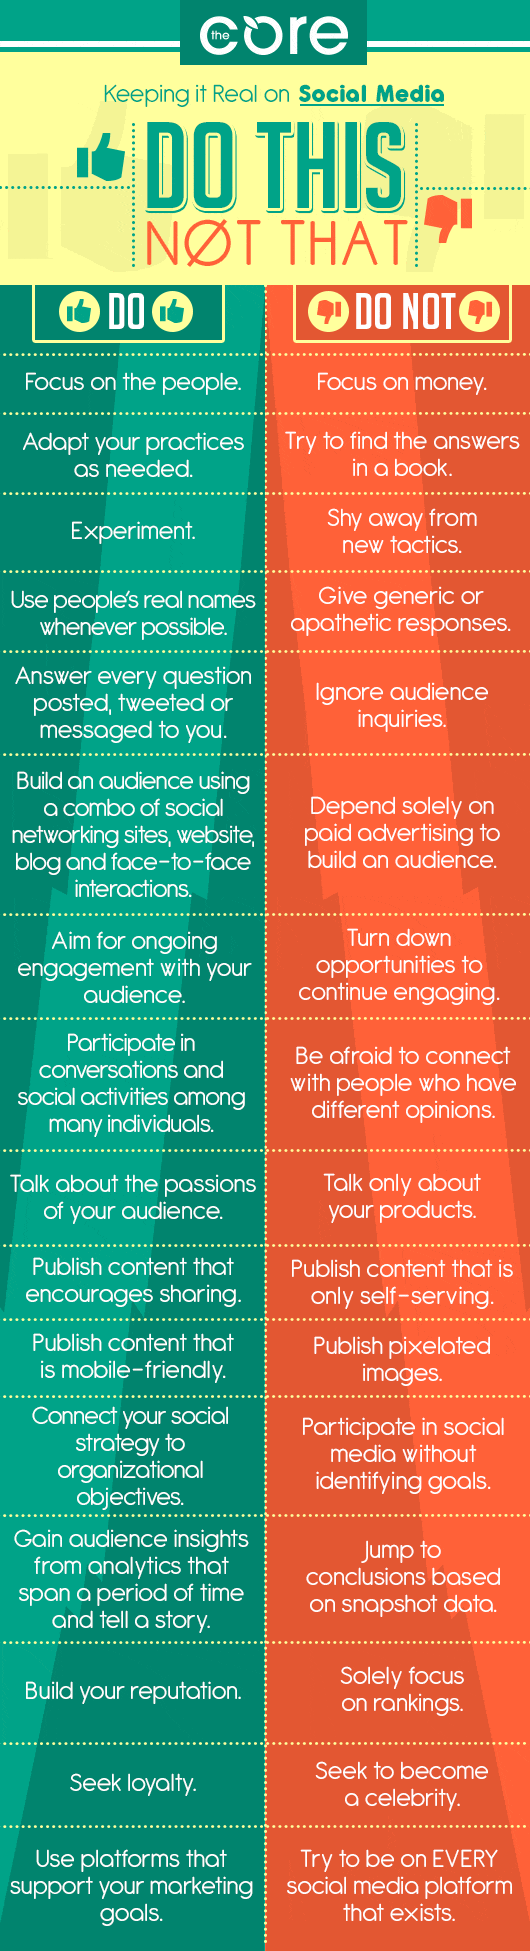 16 Things You Should Do On #SocialMedia To Stand Out #etiquette